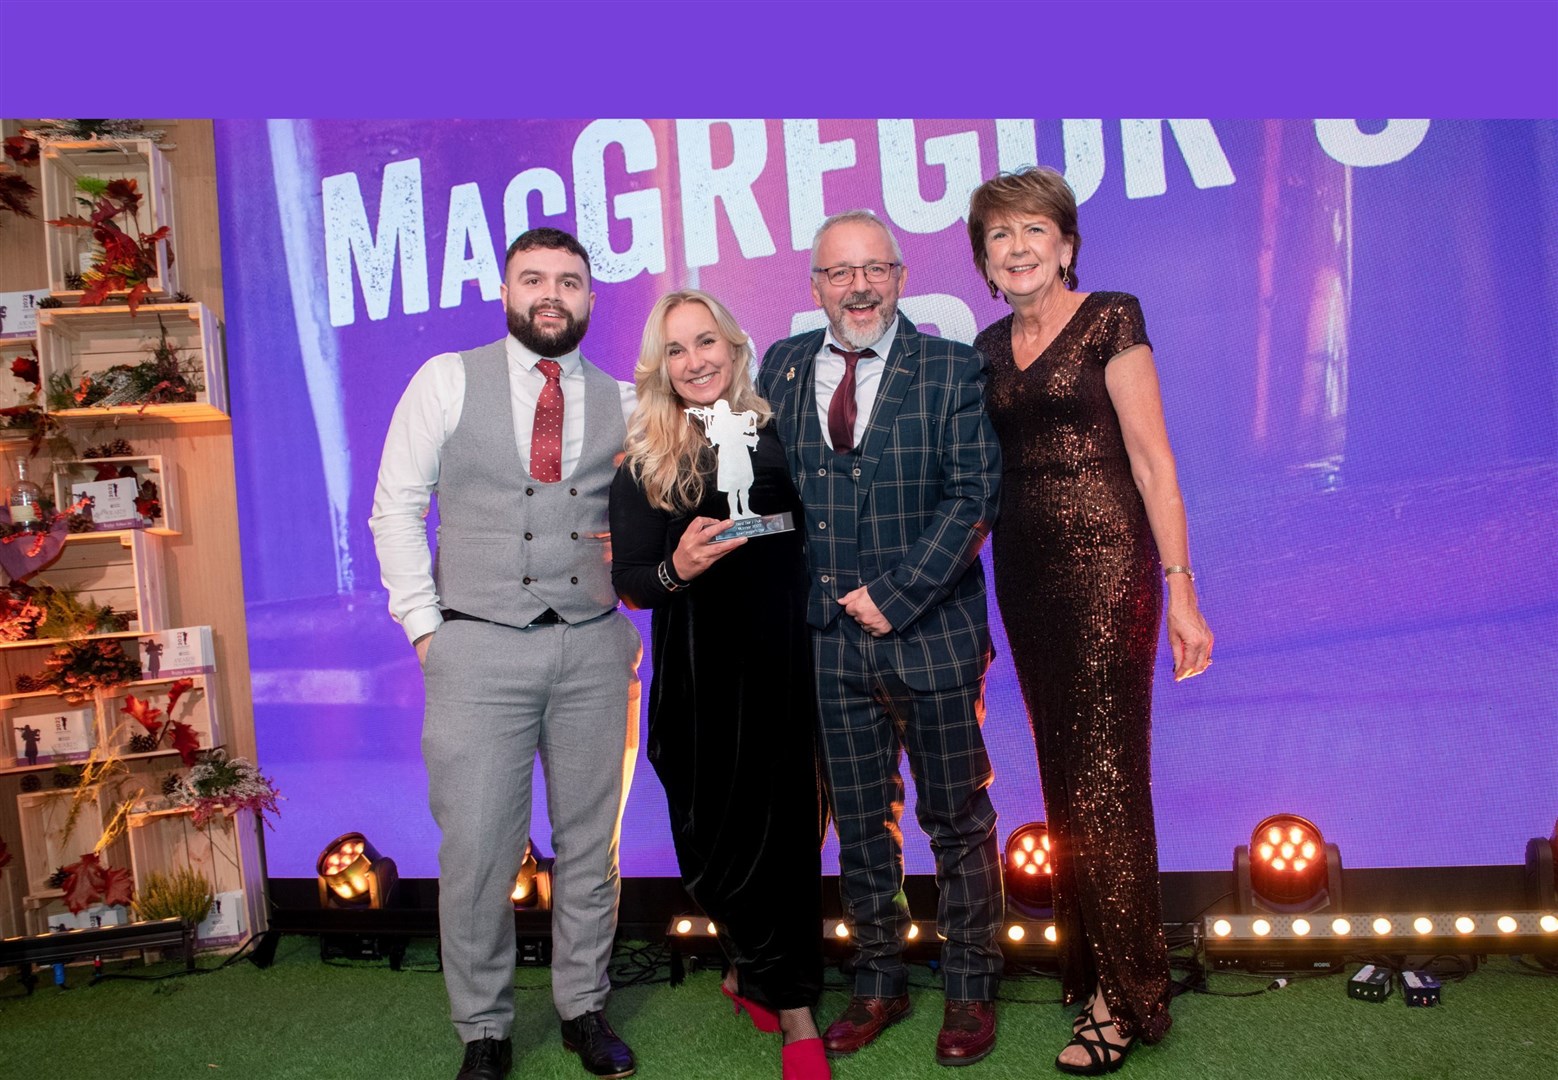 HITA director, Marina Huggett (right) presents the 2022 best bar/pub Thistle award to the team from MacGregor’s. Picture: Callum Mackay